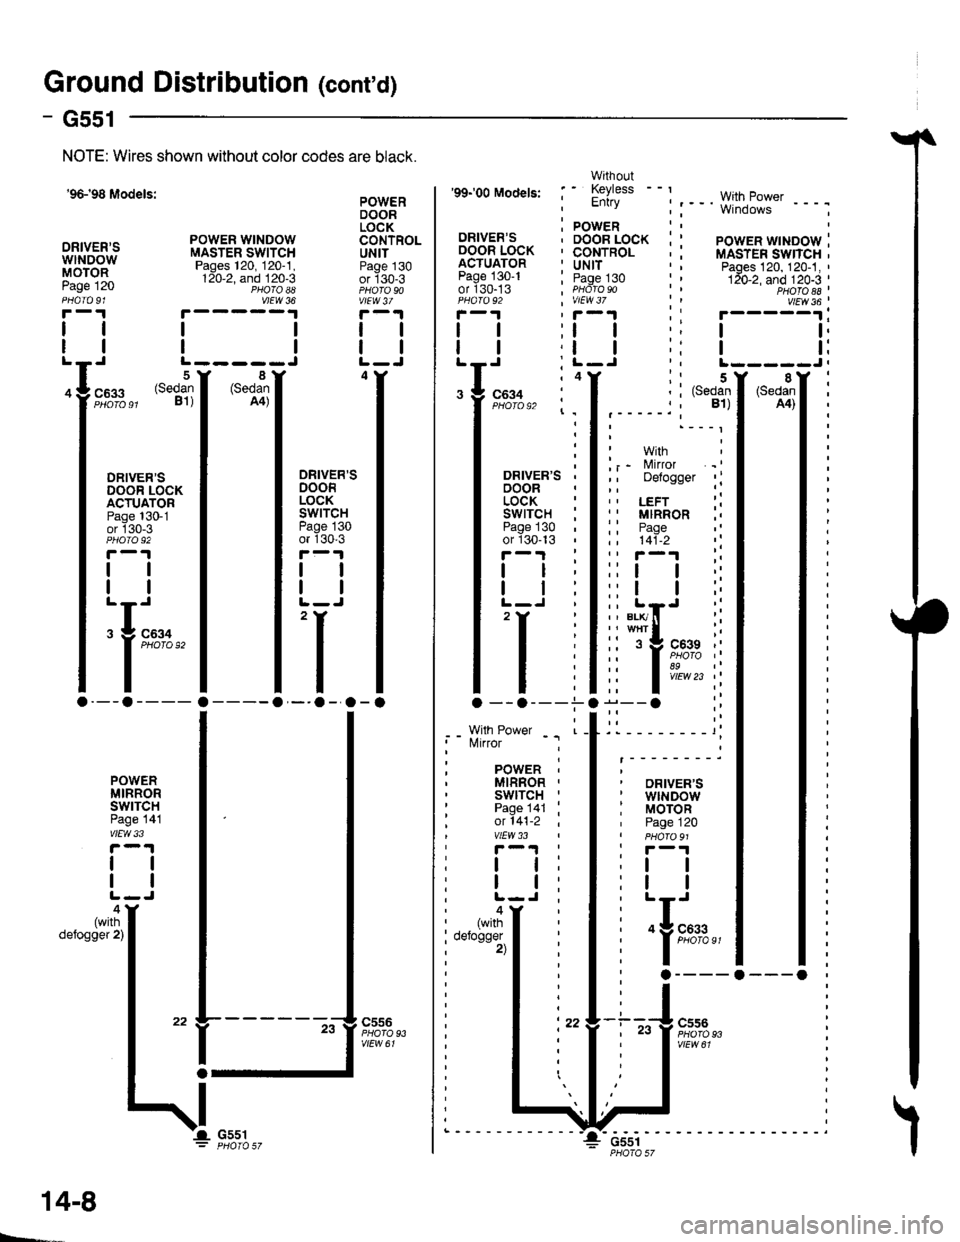 HONDA CIVIC 1997 6.G Service Manual Ground Distribution (contd)
1
- G551
Page
I
I
96-98 Models:
DRIVERSwtNDowMOTOR
NOTE: Wires shown without color codes are black.
4
12091
I
I
c633
oRrvERsDOOR LOCKACTUATORPage 130-1or 130-3
tl
tl
: